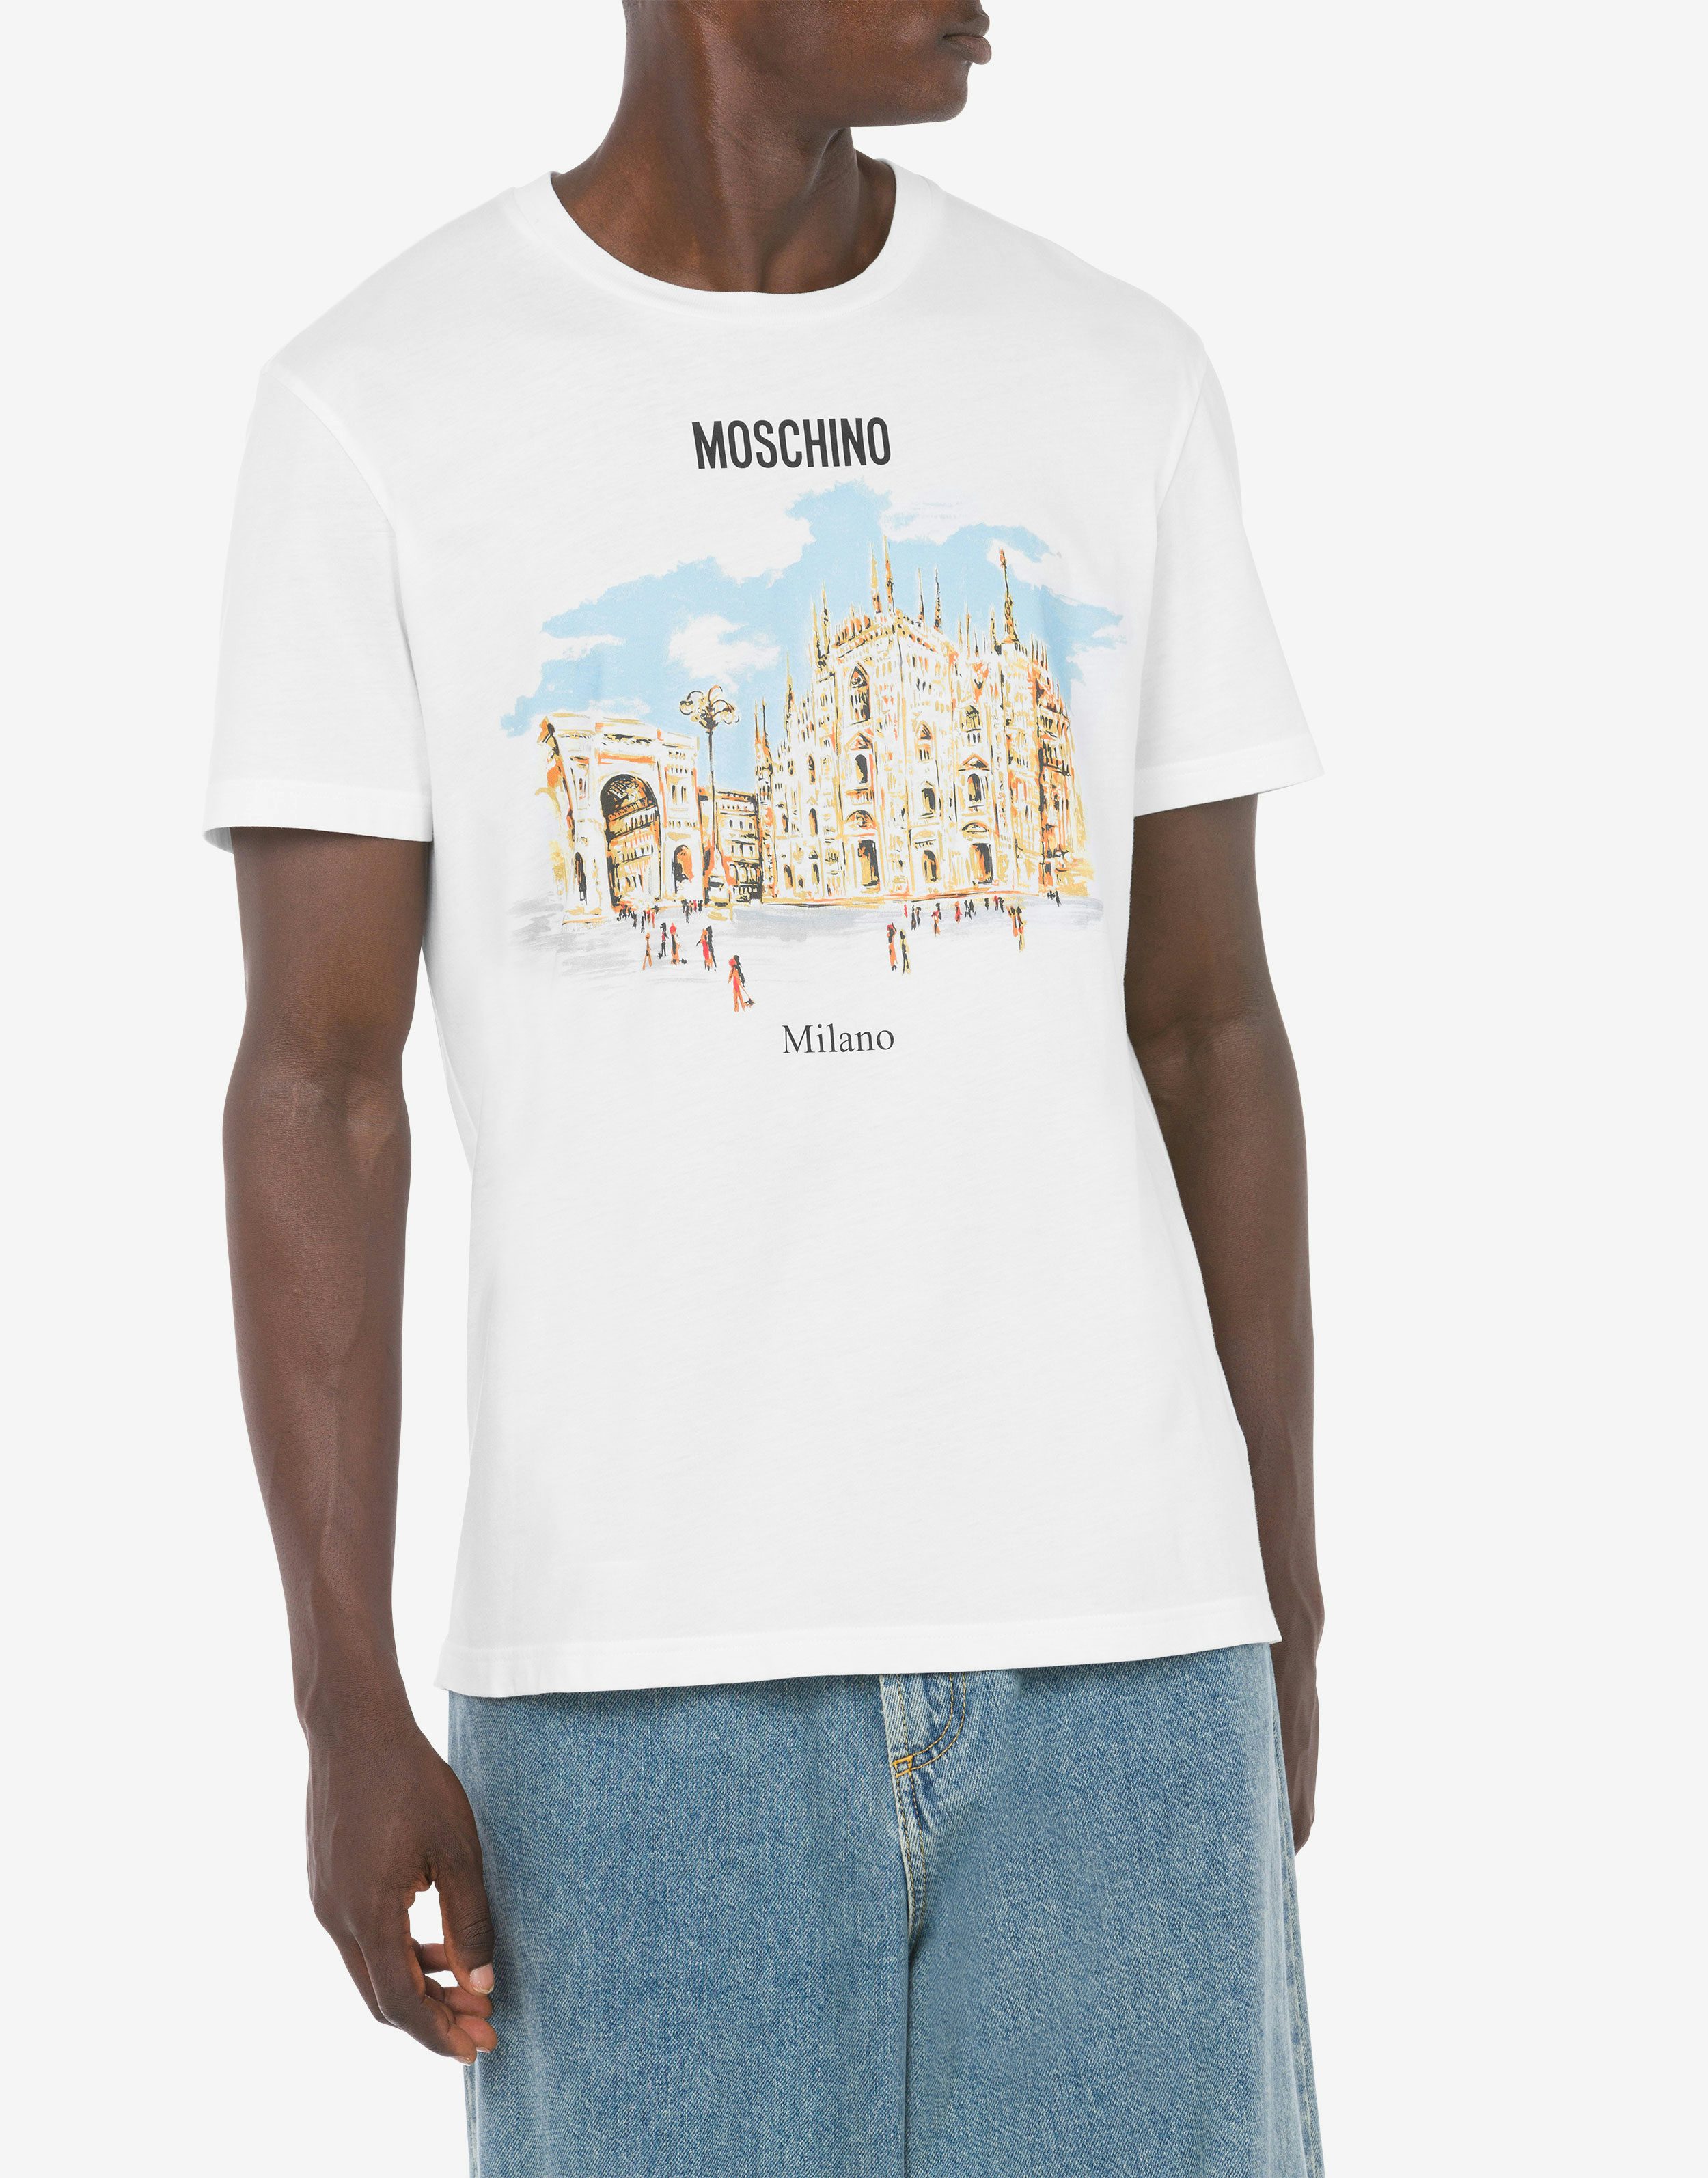 Moschino T-Shirts for Men - Official Store